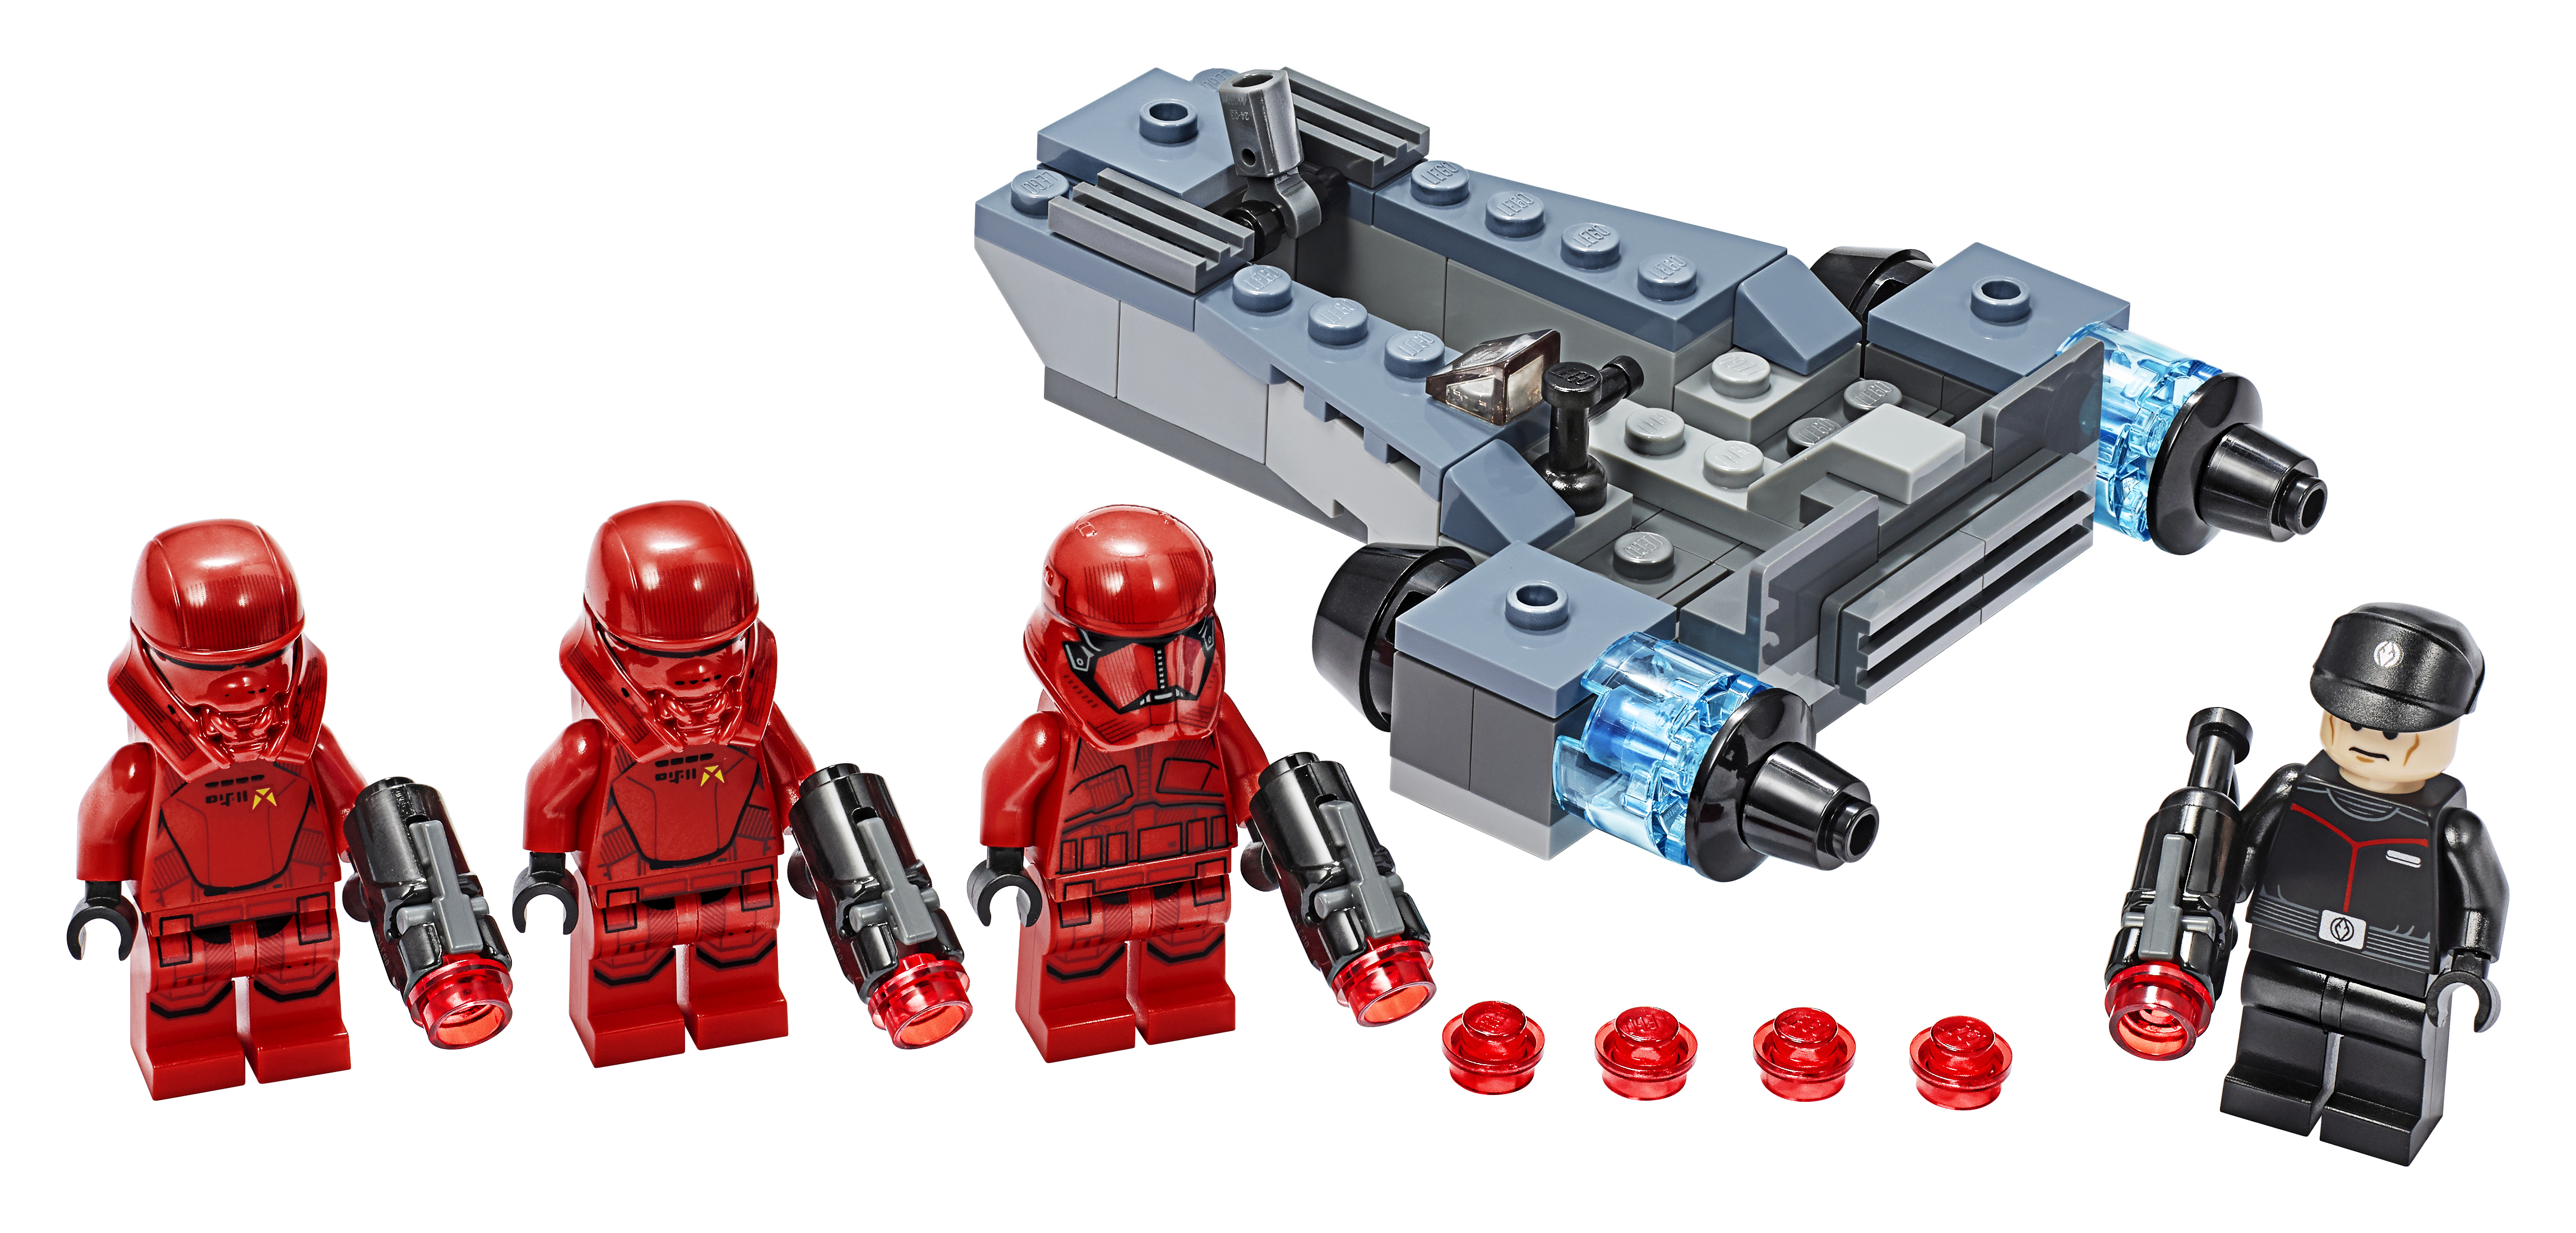 TROS Sith Troopers Lego Battle Pack 3